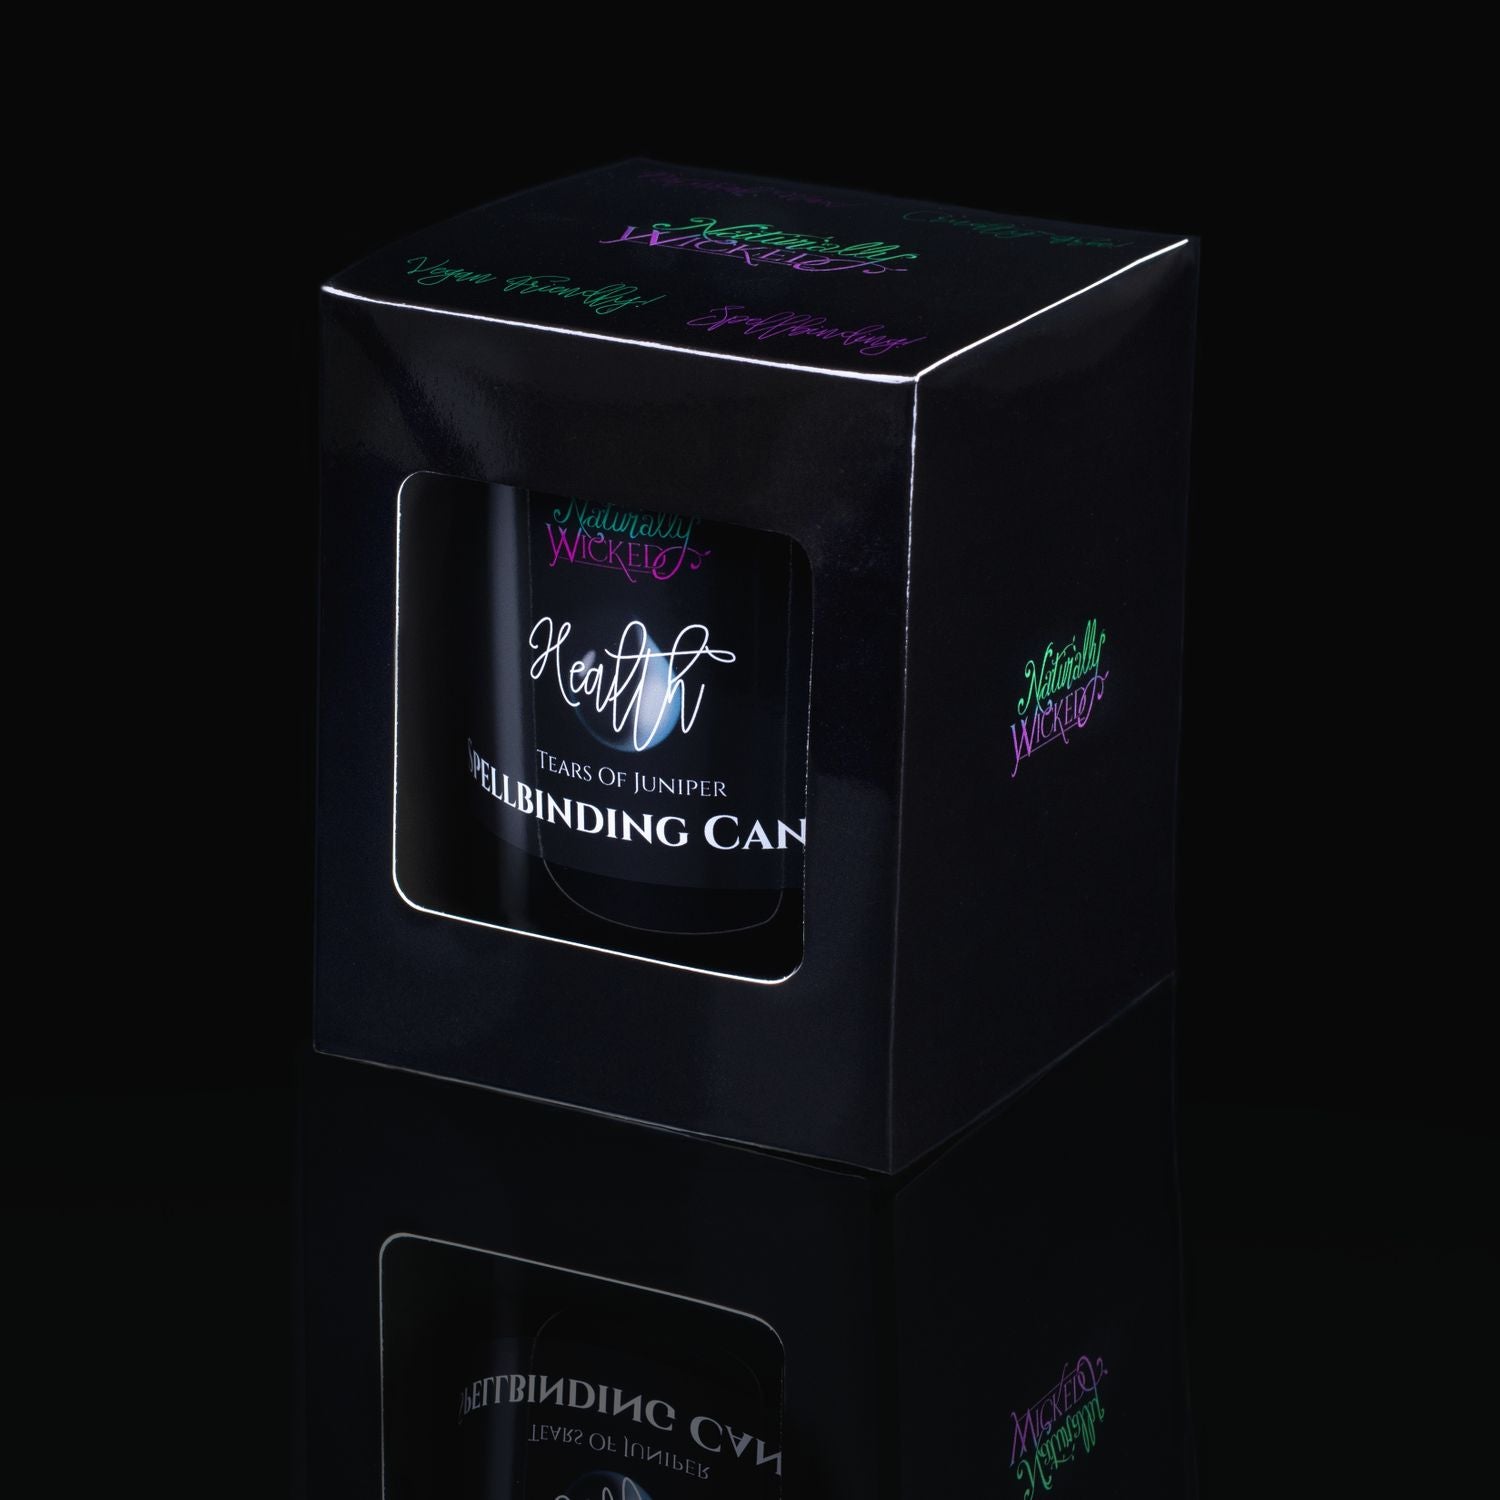 The Perfect Spell Candle And Unique Gift. Naturally Wicked Spellbinding Health Candle Displayed In A Sleek Black Gloss Gift Box. The Candle Features Plant-Based Smooth Blue Wax, A Wood Wick And A Beautiful Teal Banded Agate Crystal.